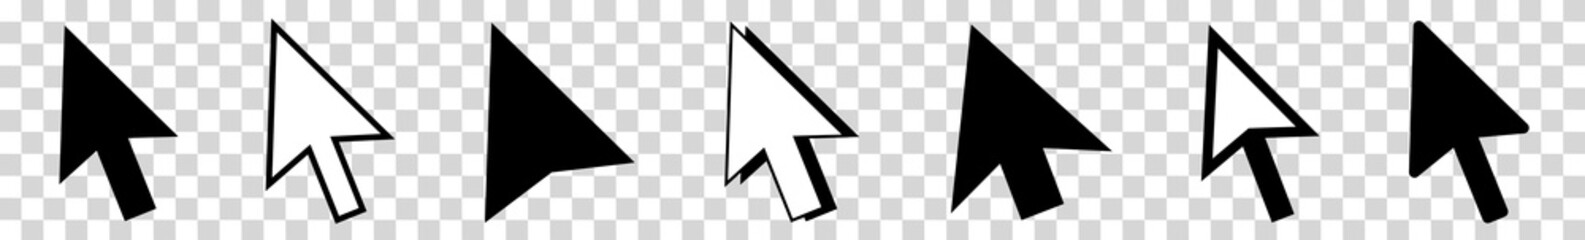 Cursor | Mouse Arrow Icon | Computer Mouse Pointer | Isolated Transparent | Click Variations